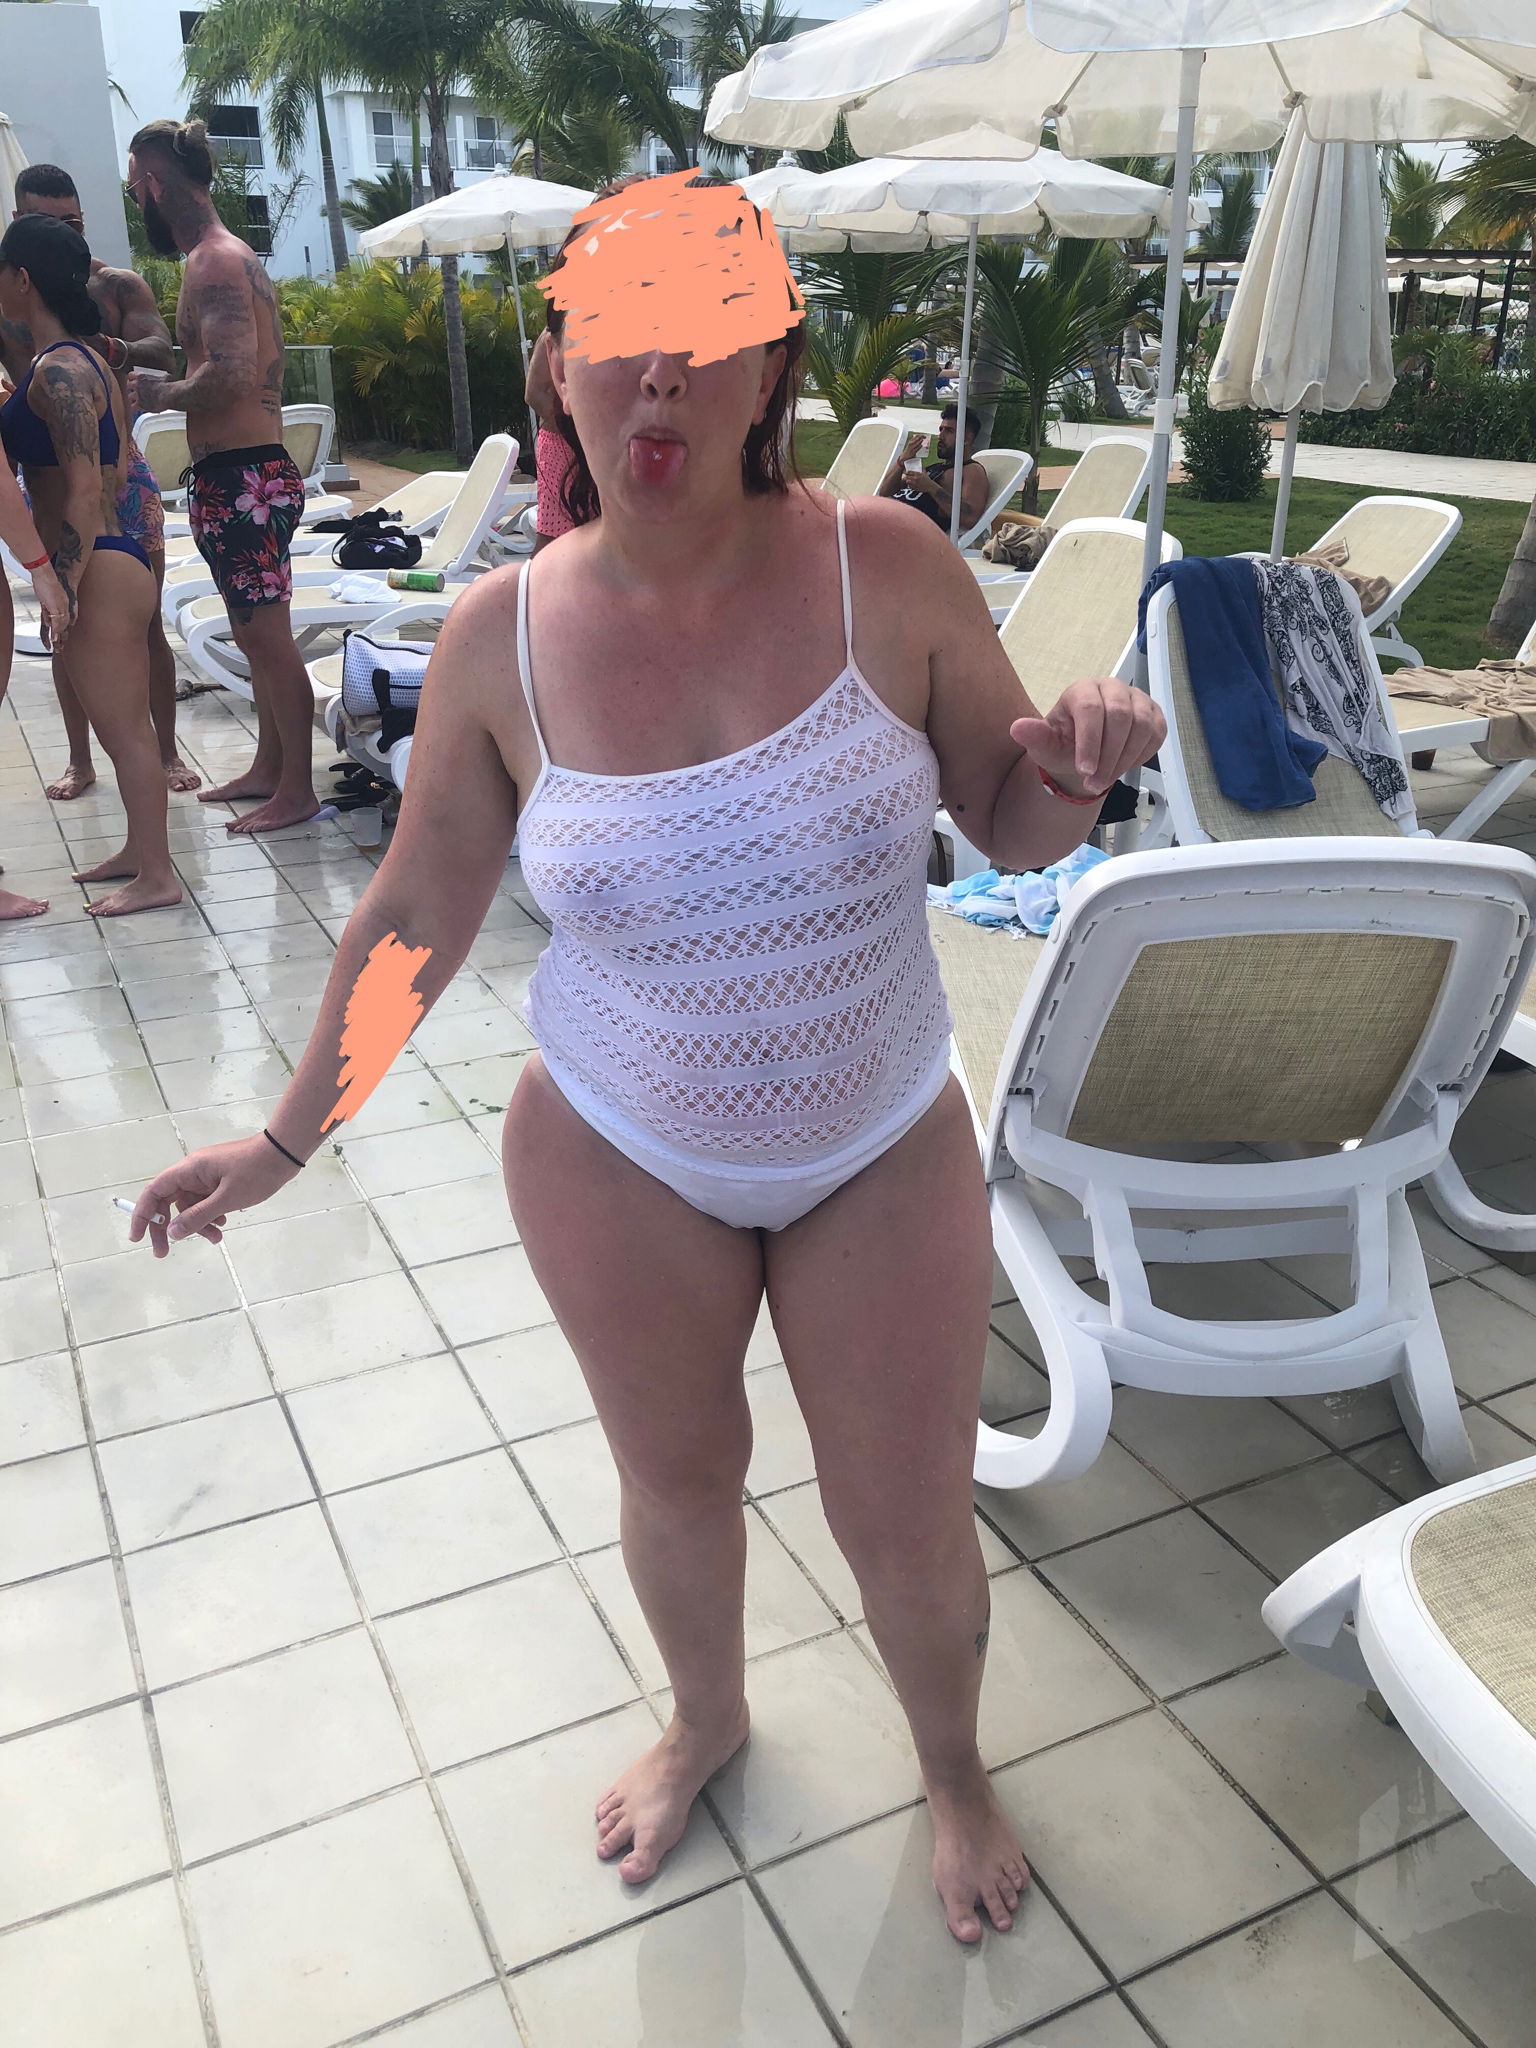 Photo by Michigan-perv with the username @Michigan-perv,  May 14, 2019 at 7:07 AM. The post is about the topic Mid-Michigan Amateurs and the text says 'Last day of vacation. 

https://imgur.com/a/g7oDuS6'